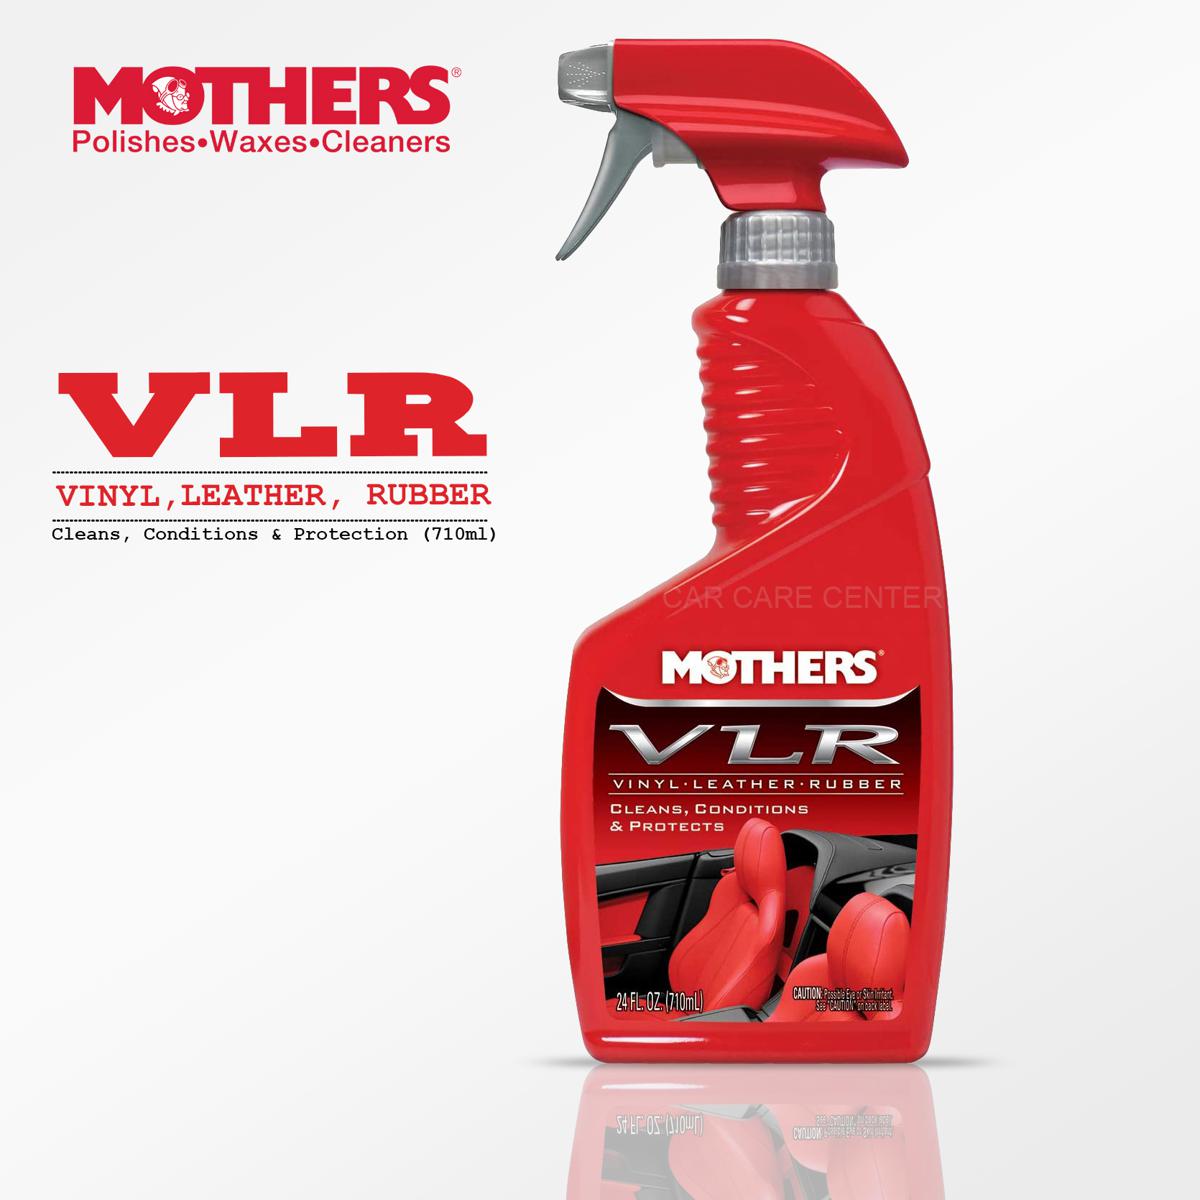 Mothers VLR for cleaning interior leather